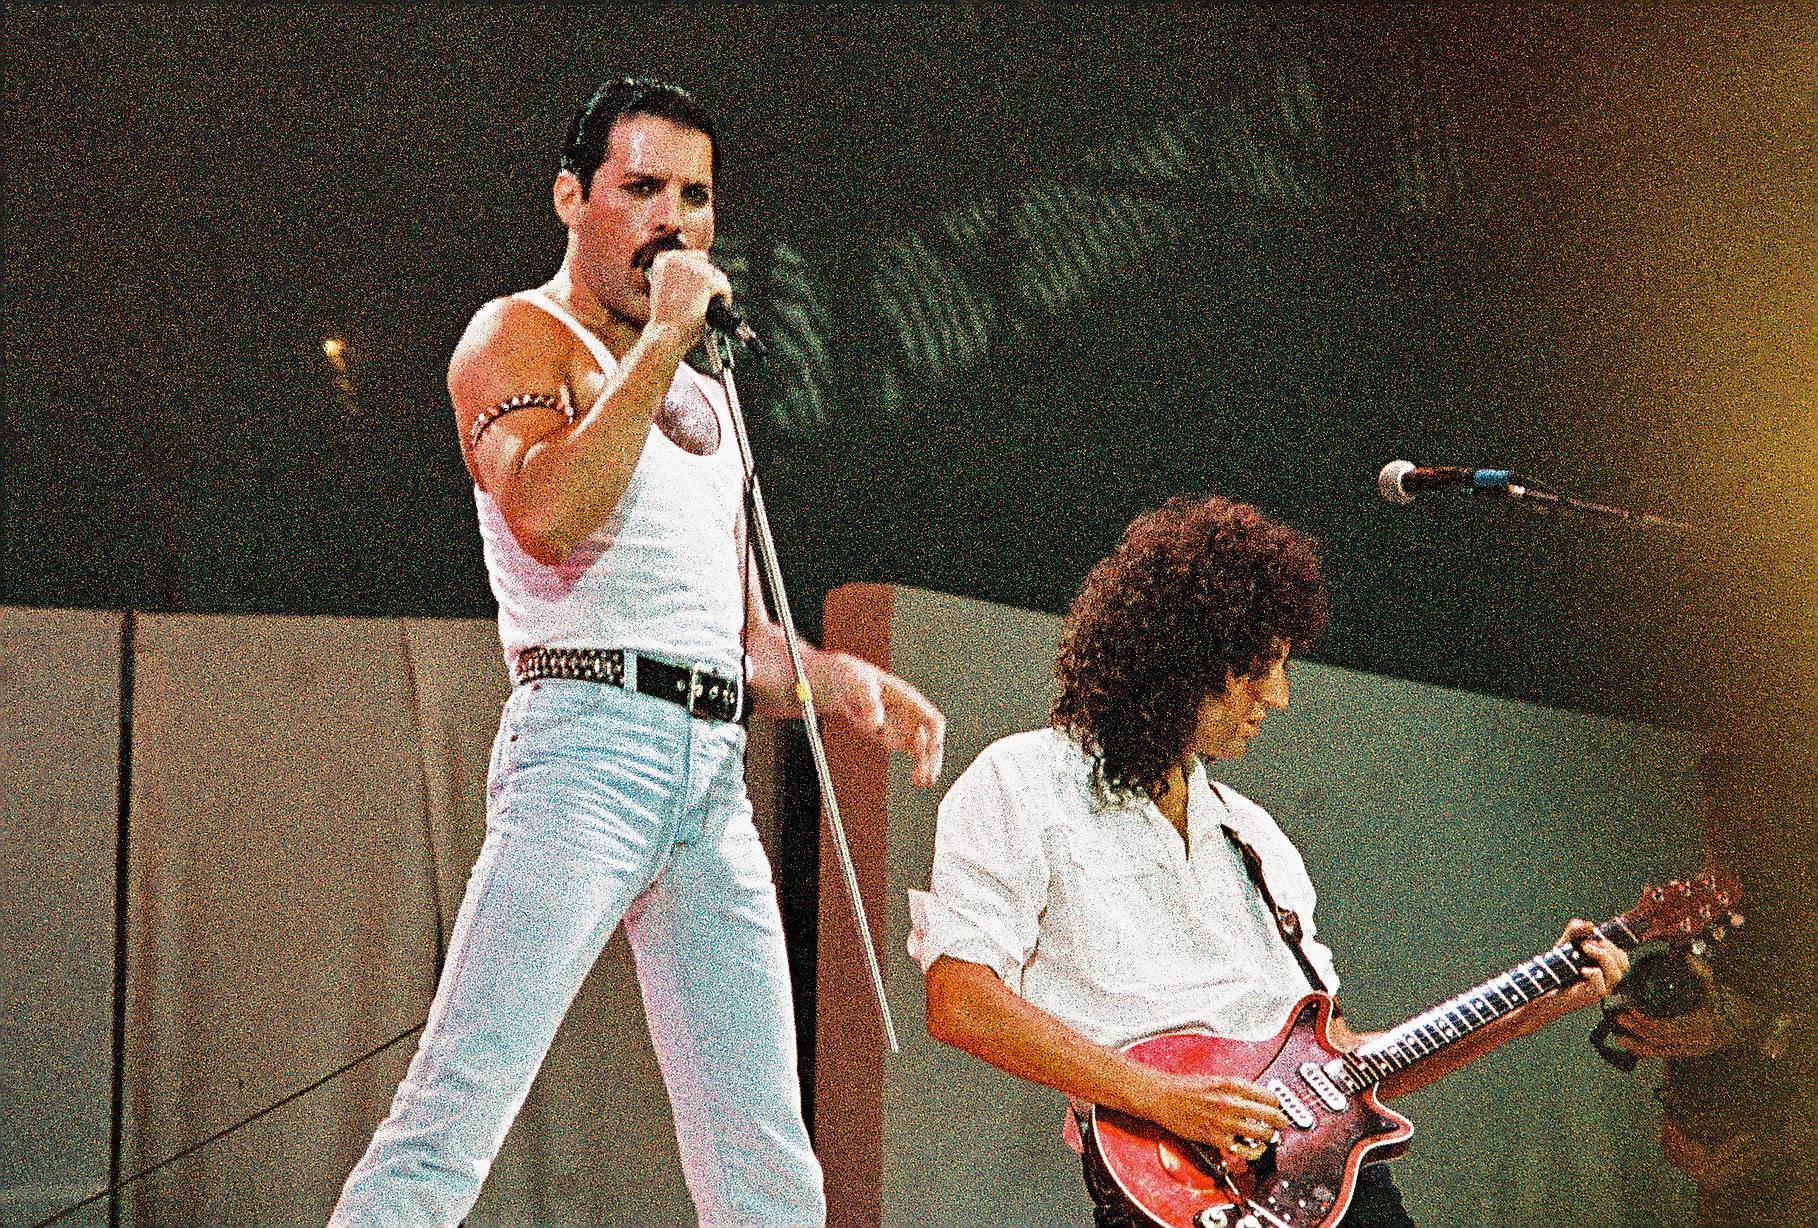 Freddie Mercury and Brian May of Queen perform at Live Aid in Wembley Stadium in London, England